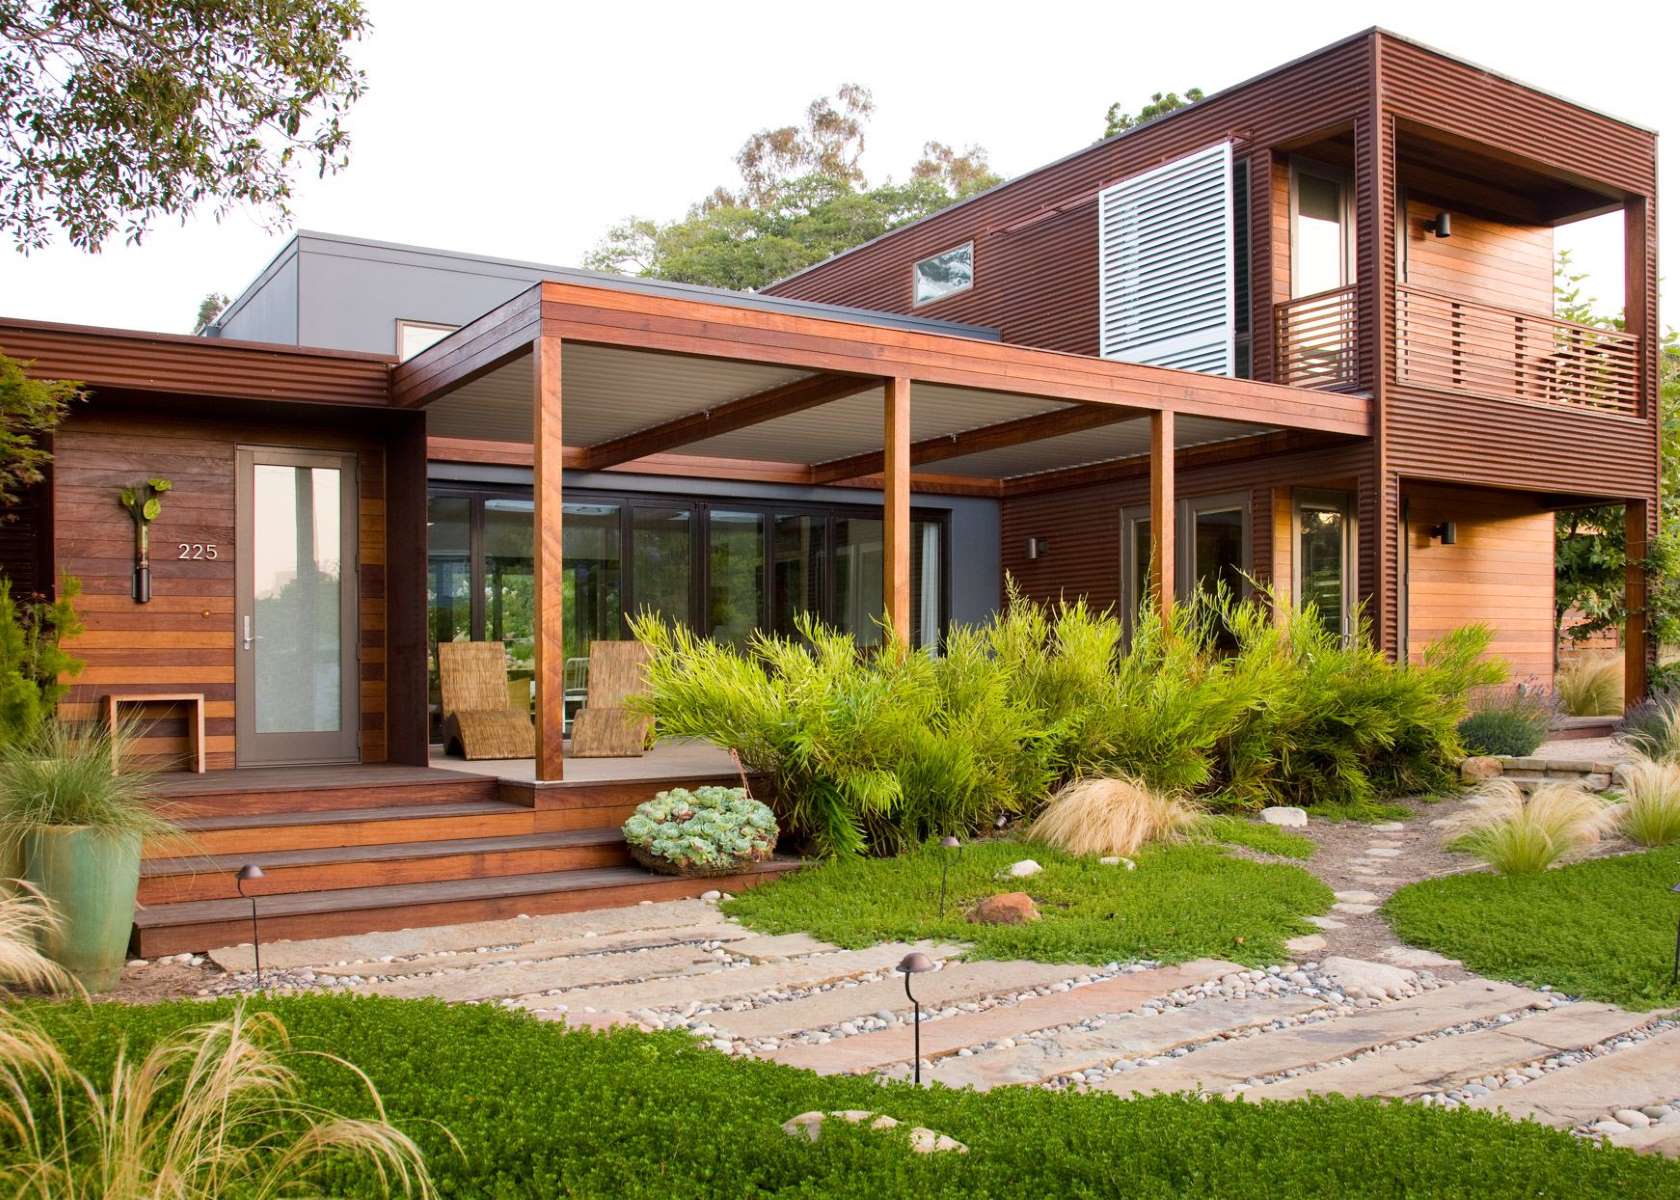 How To Design An Eco-Friendly House